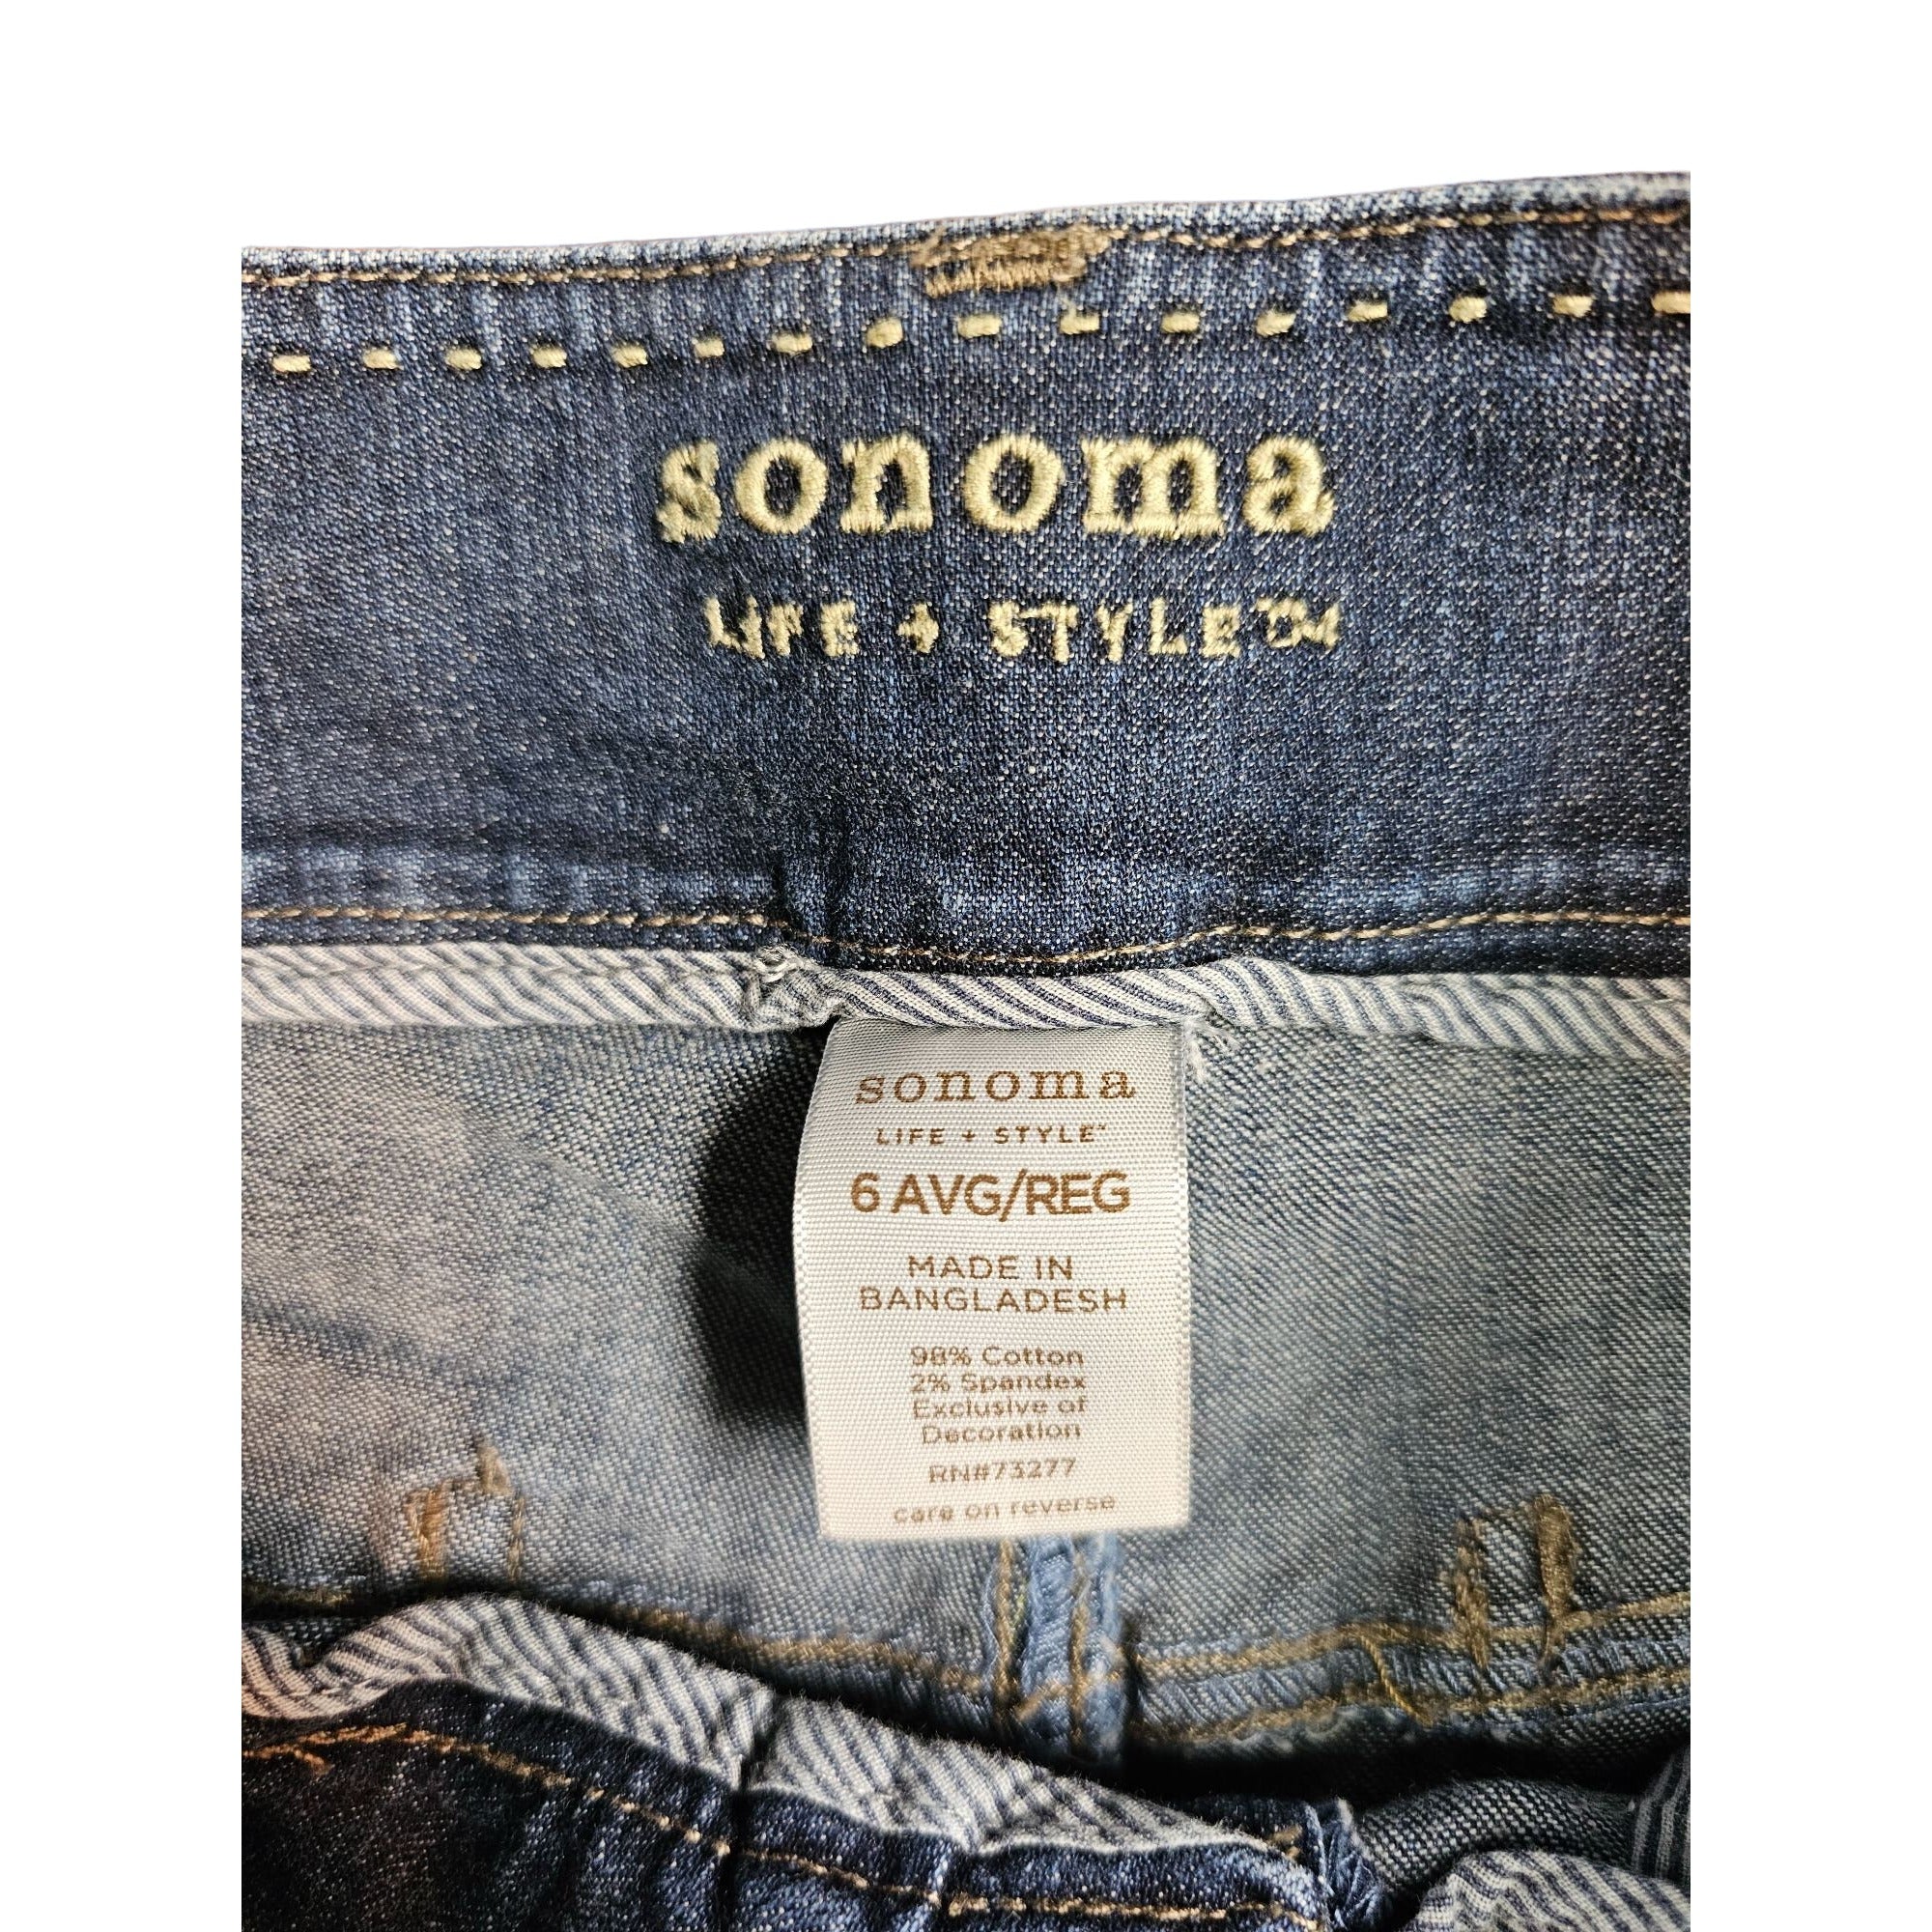 Sonoma Lift + Style Size 6 Low Waisted Loose Fit Straight Leg Women's Capri Jeans